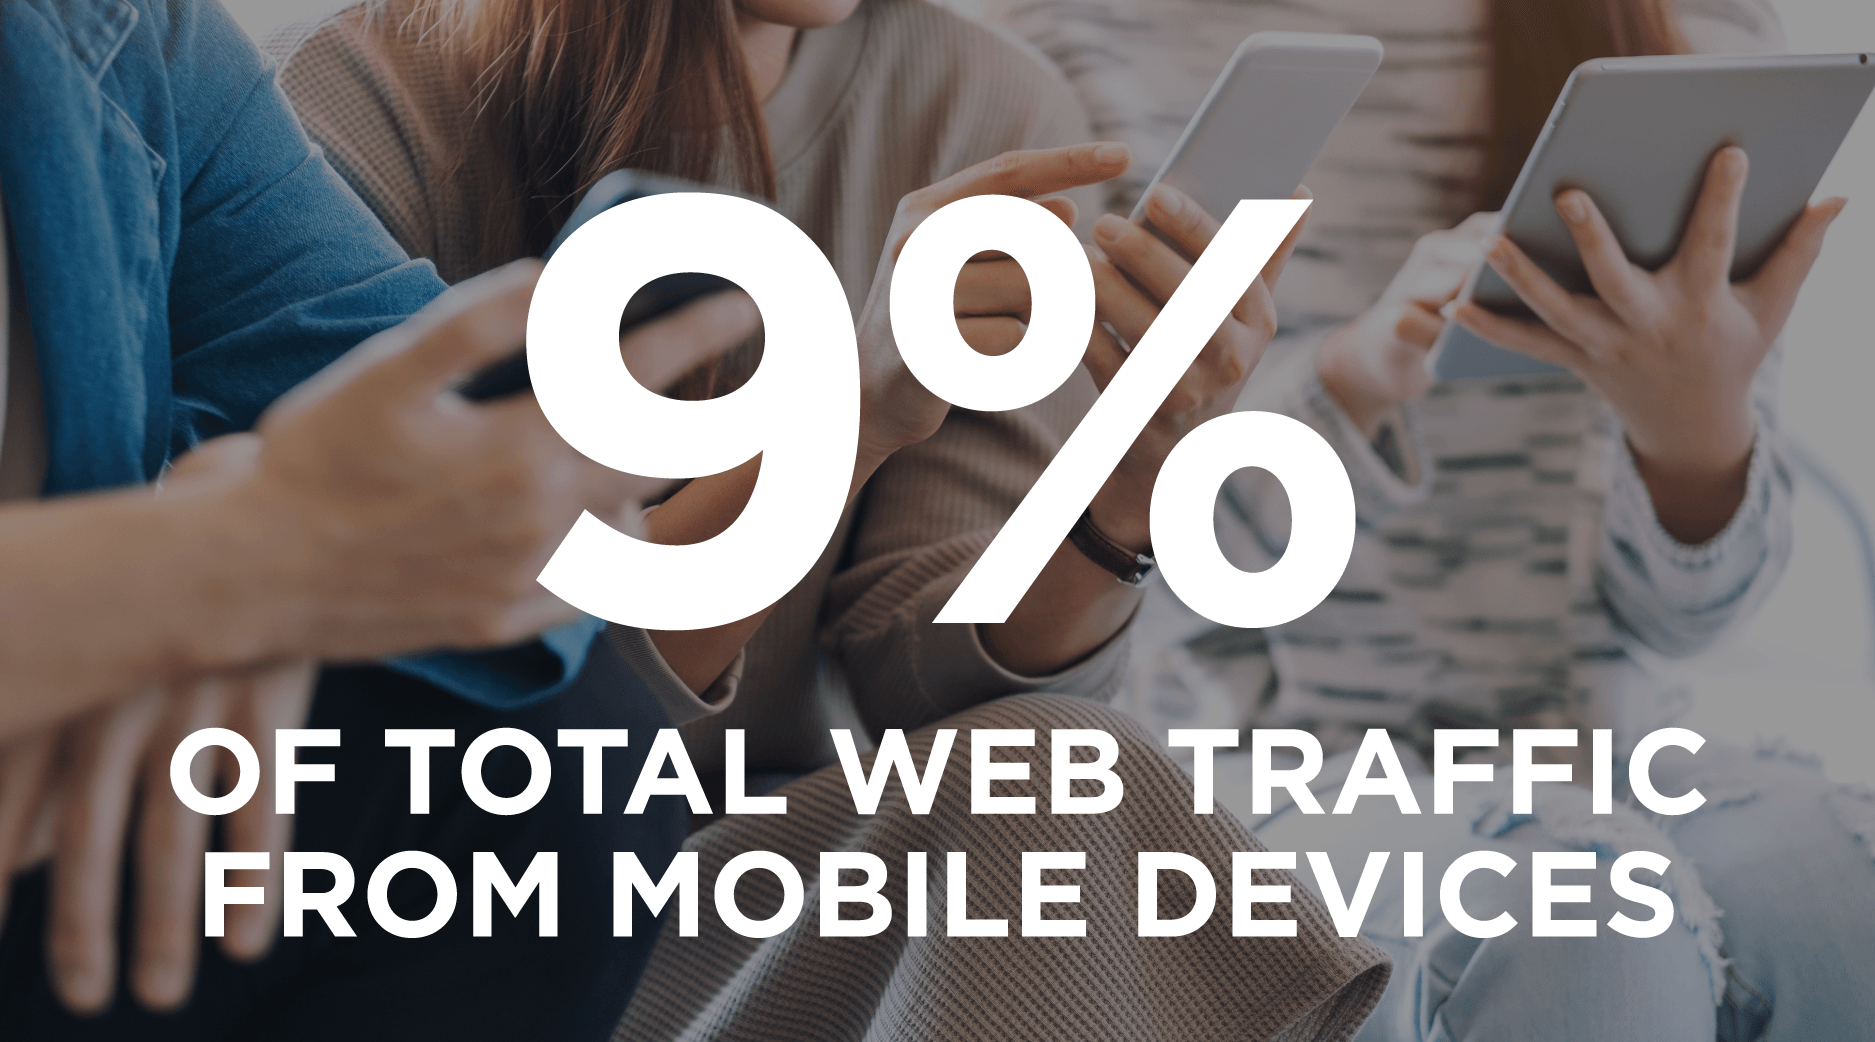 9 percent of Web Traffic from Mobile